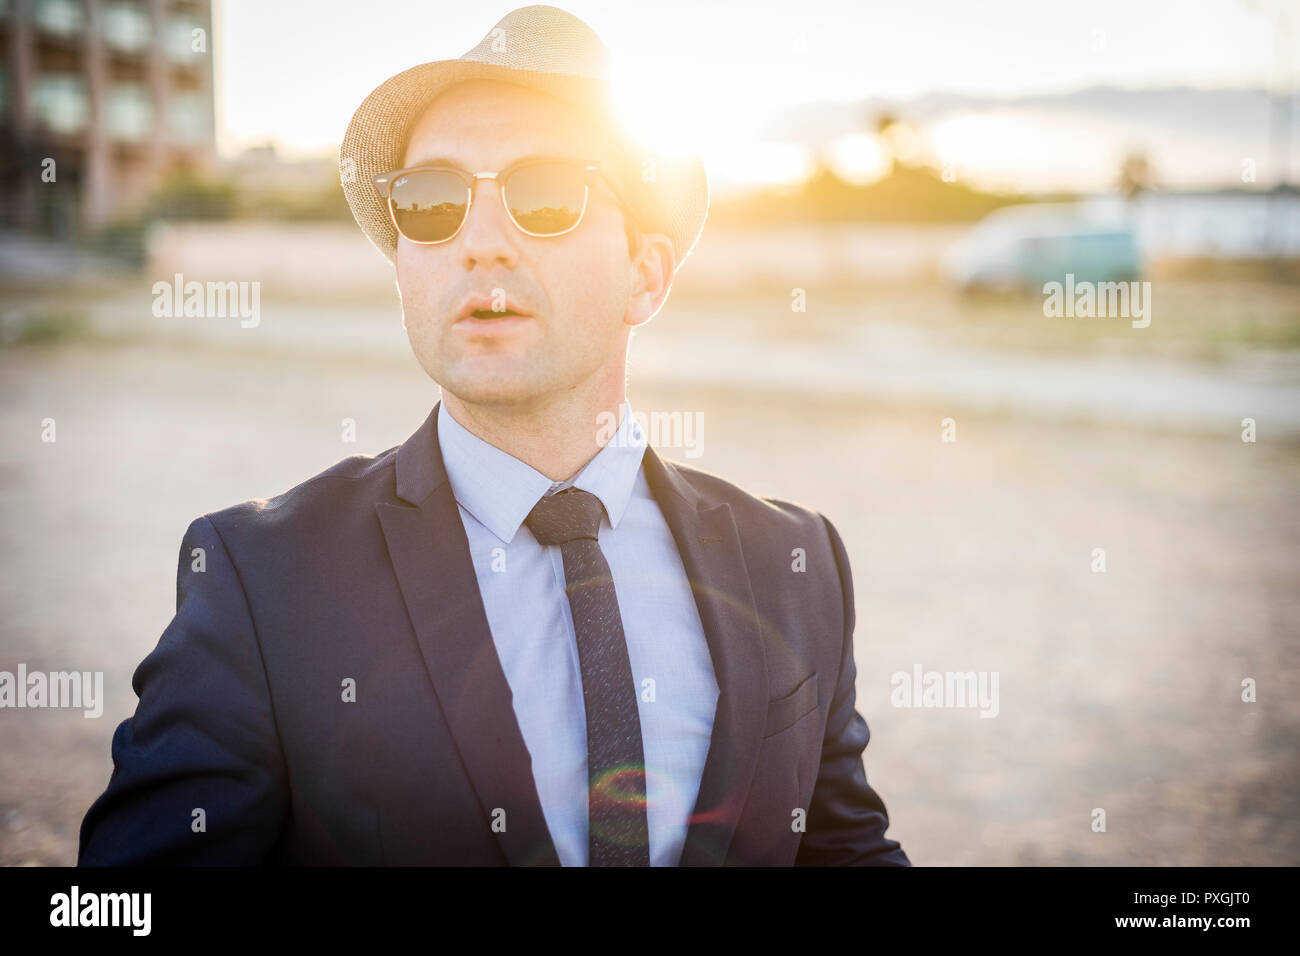 Lifestyle portrait of vintage looking young man in suit with sunglasses at sunset Stock Photo